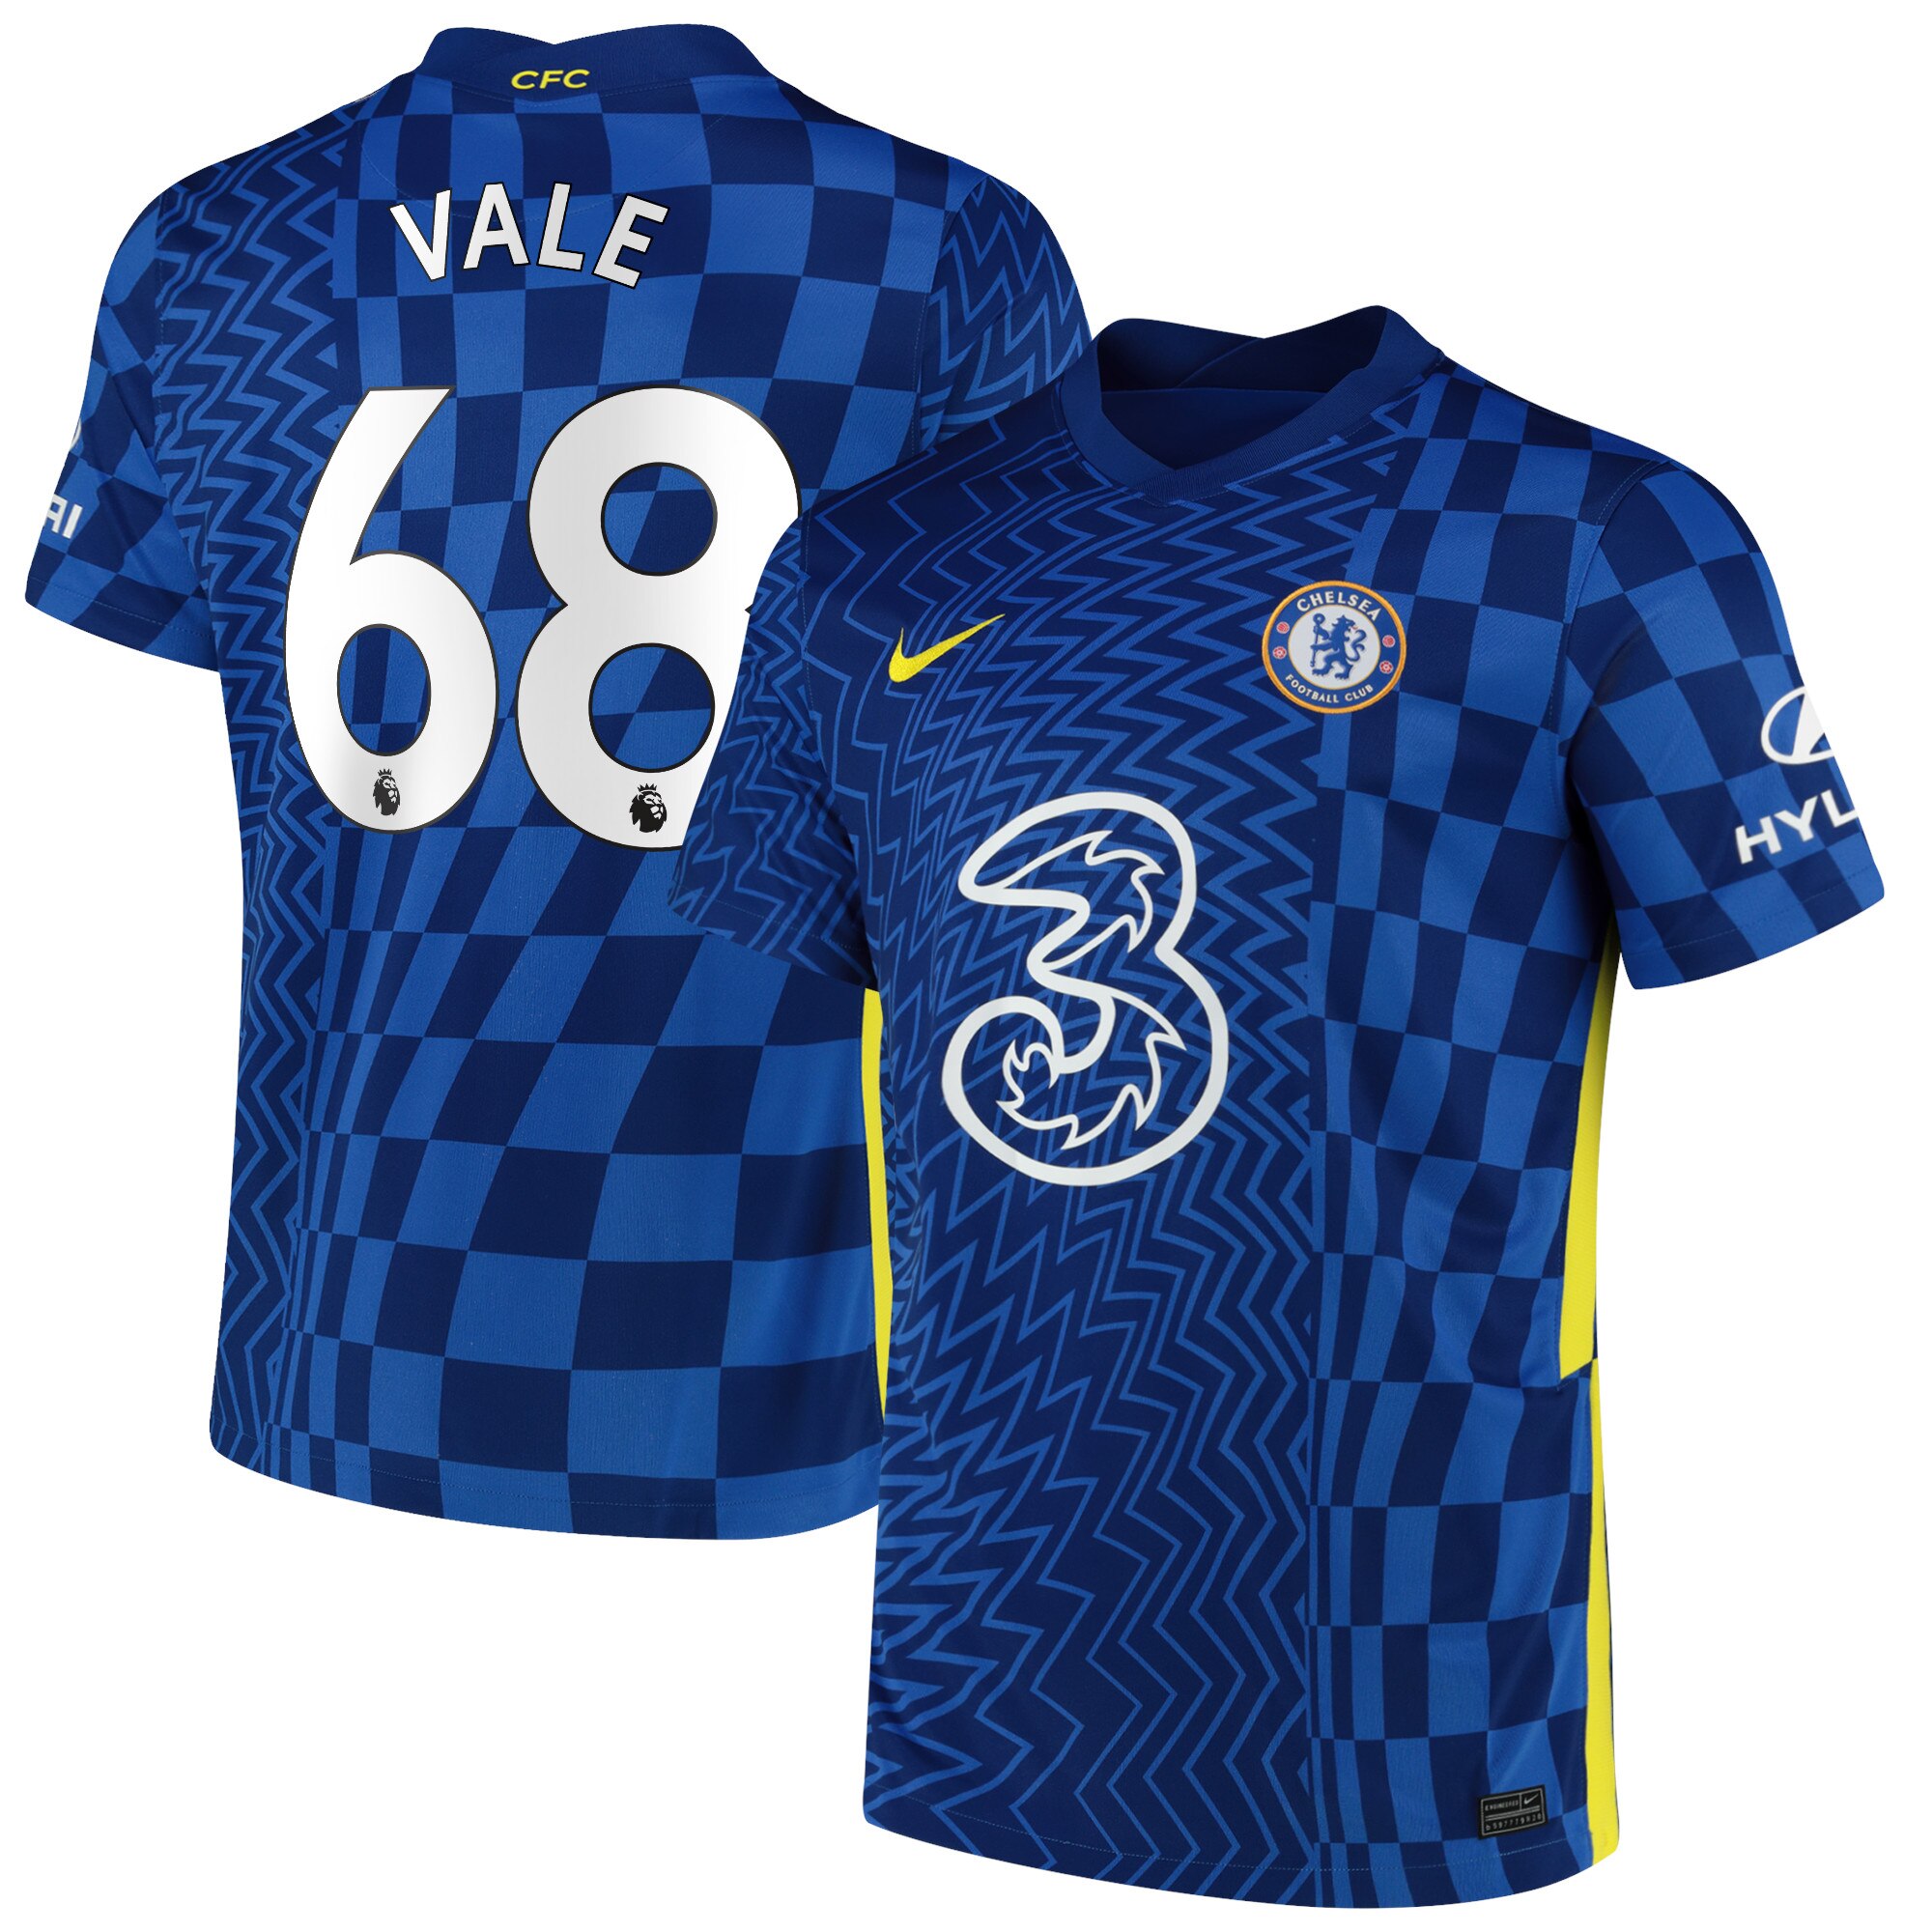 Chelsea Home Stadium Shirt 2021-22 with Vale 68 printing